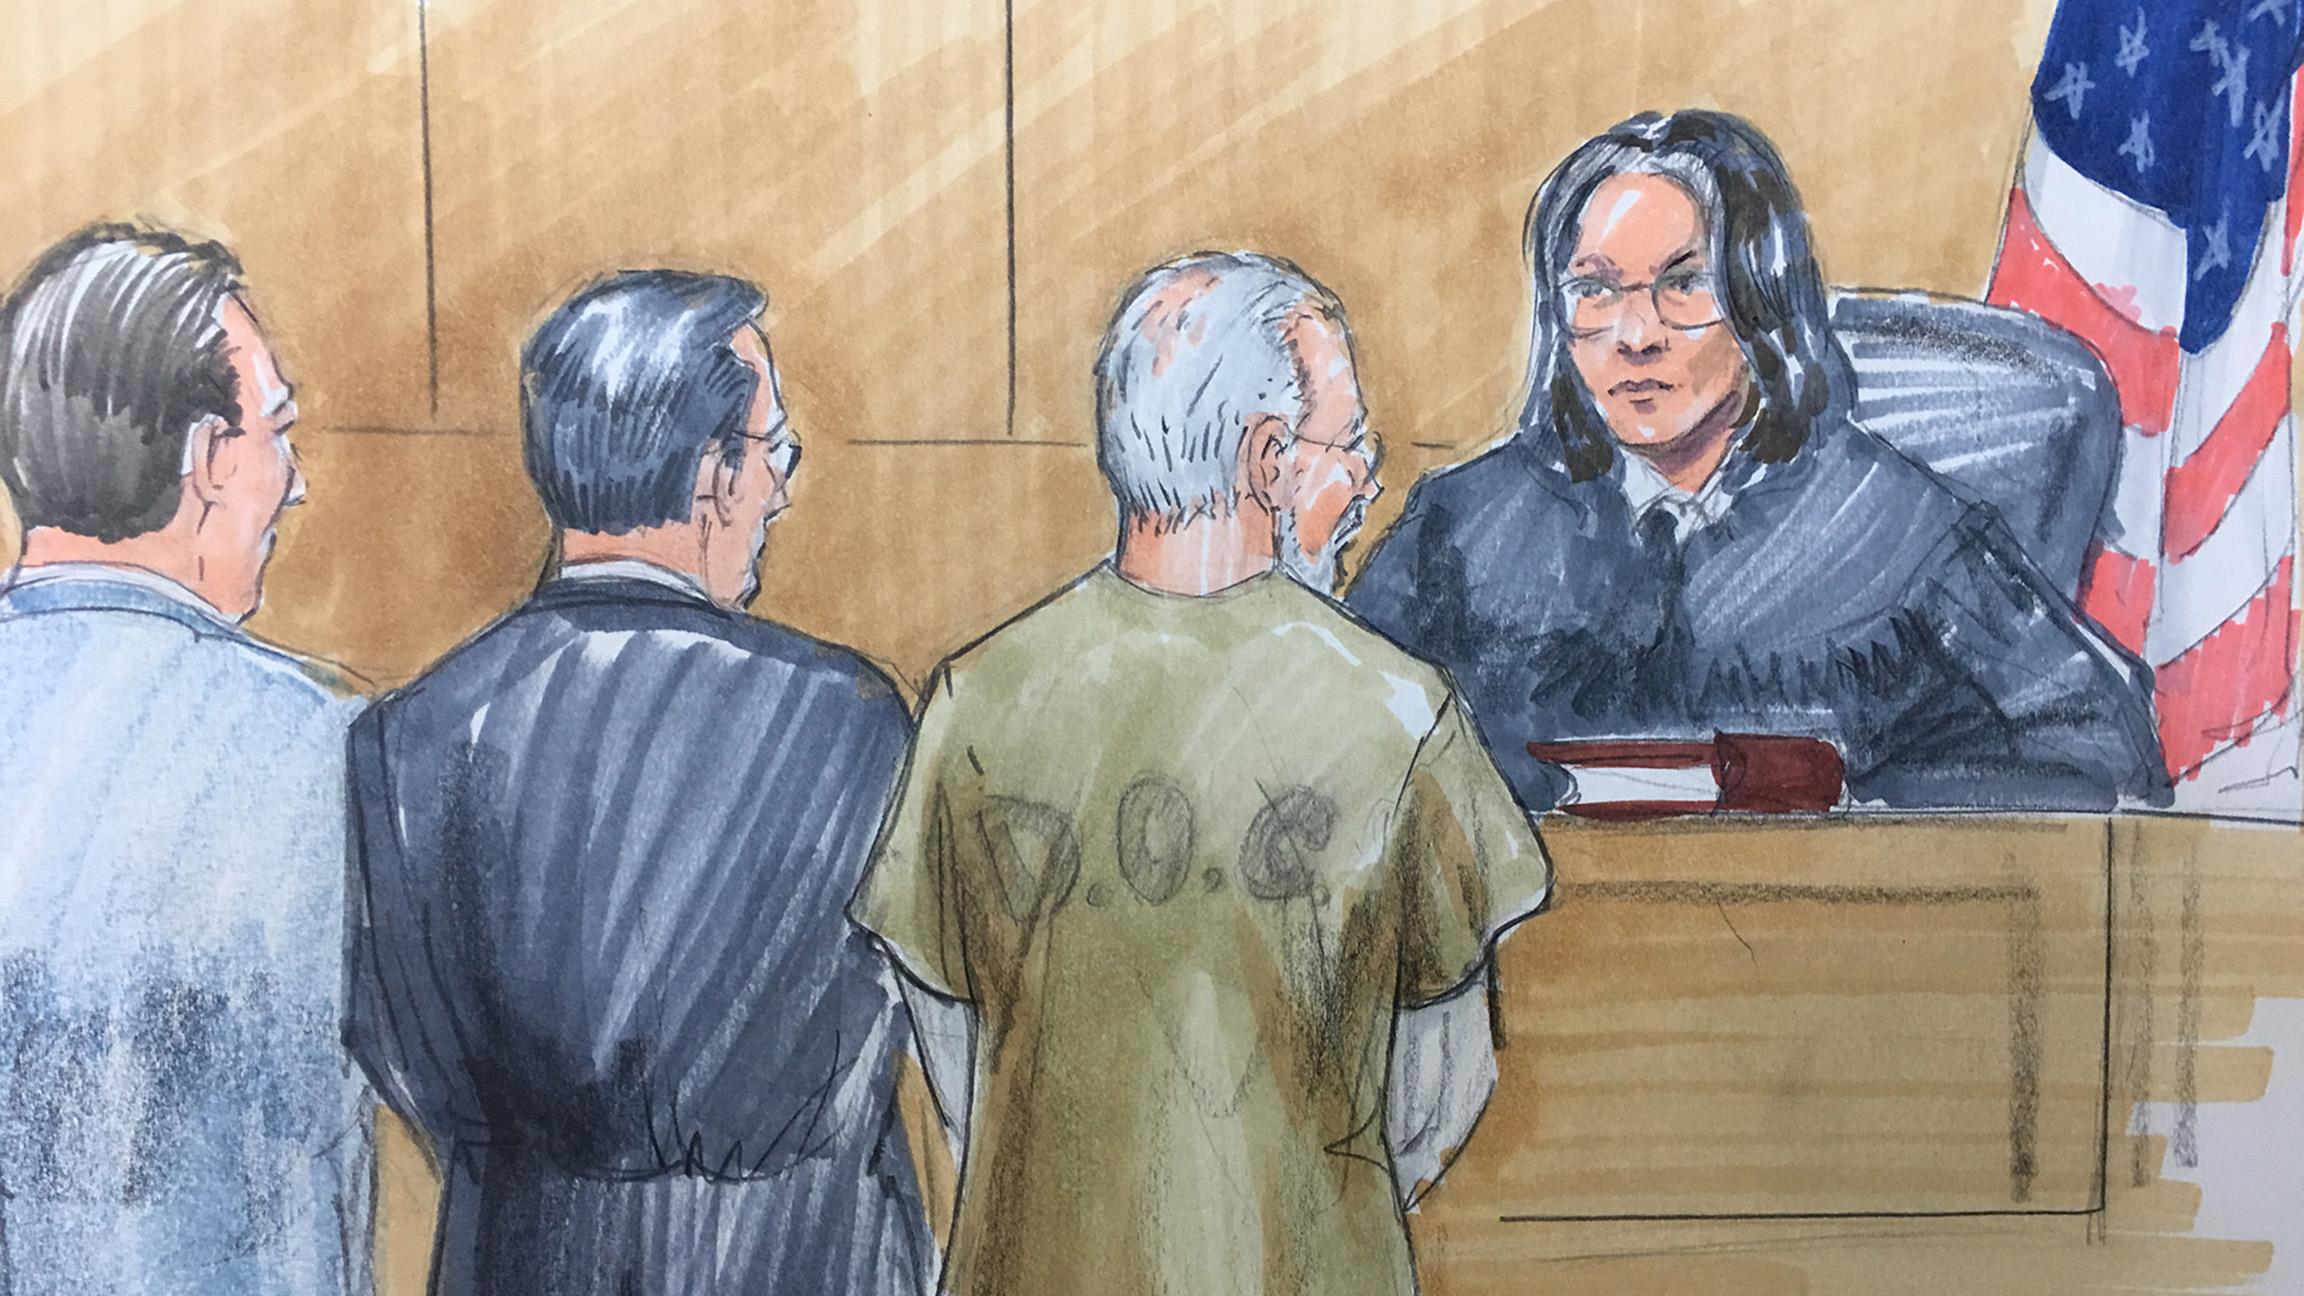 Wyndham Lathem stands with his attorneys in Cook County Circuit Court on Sept. 28, 2017. (Courtroom sketch by Thomas Gianni)